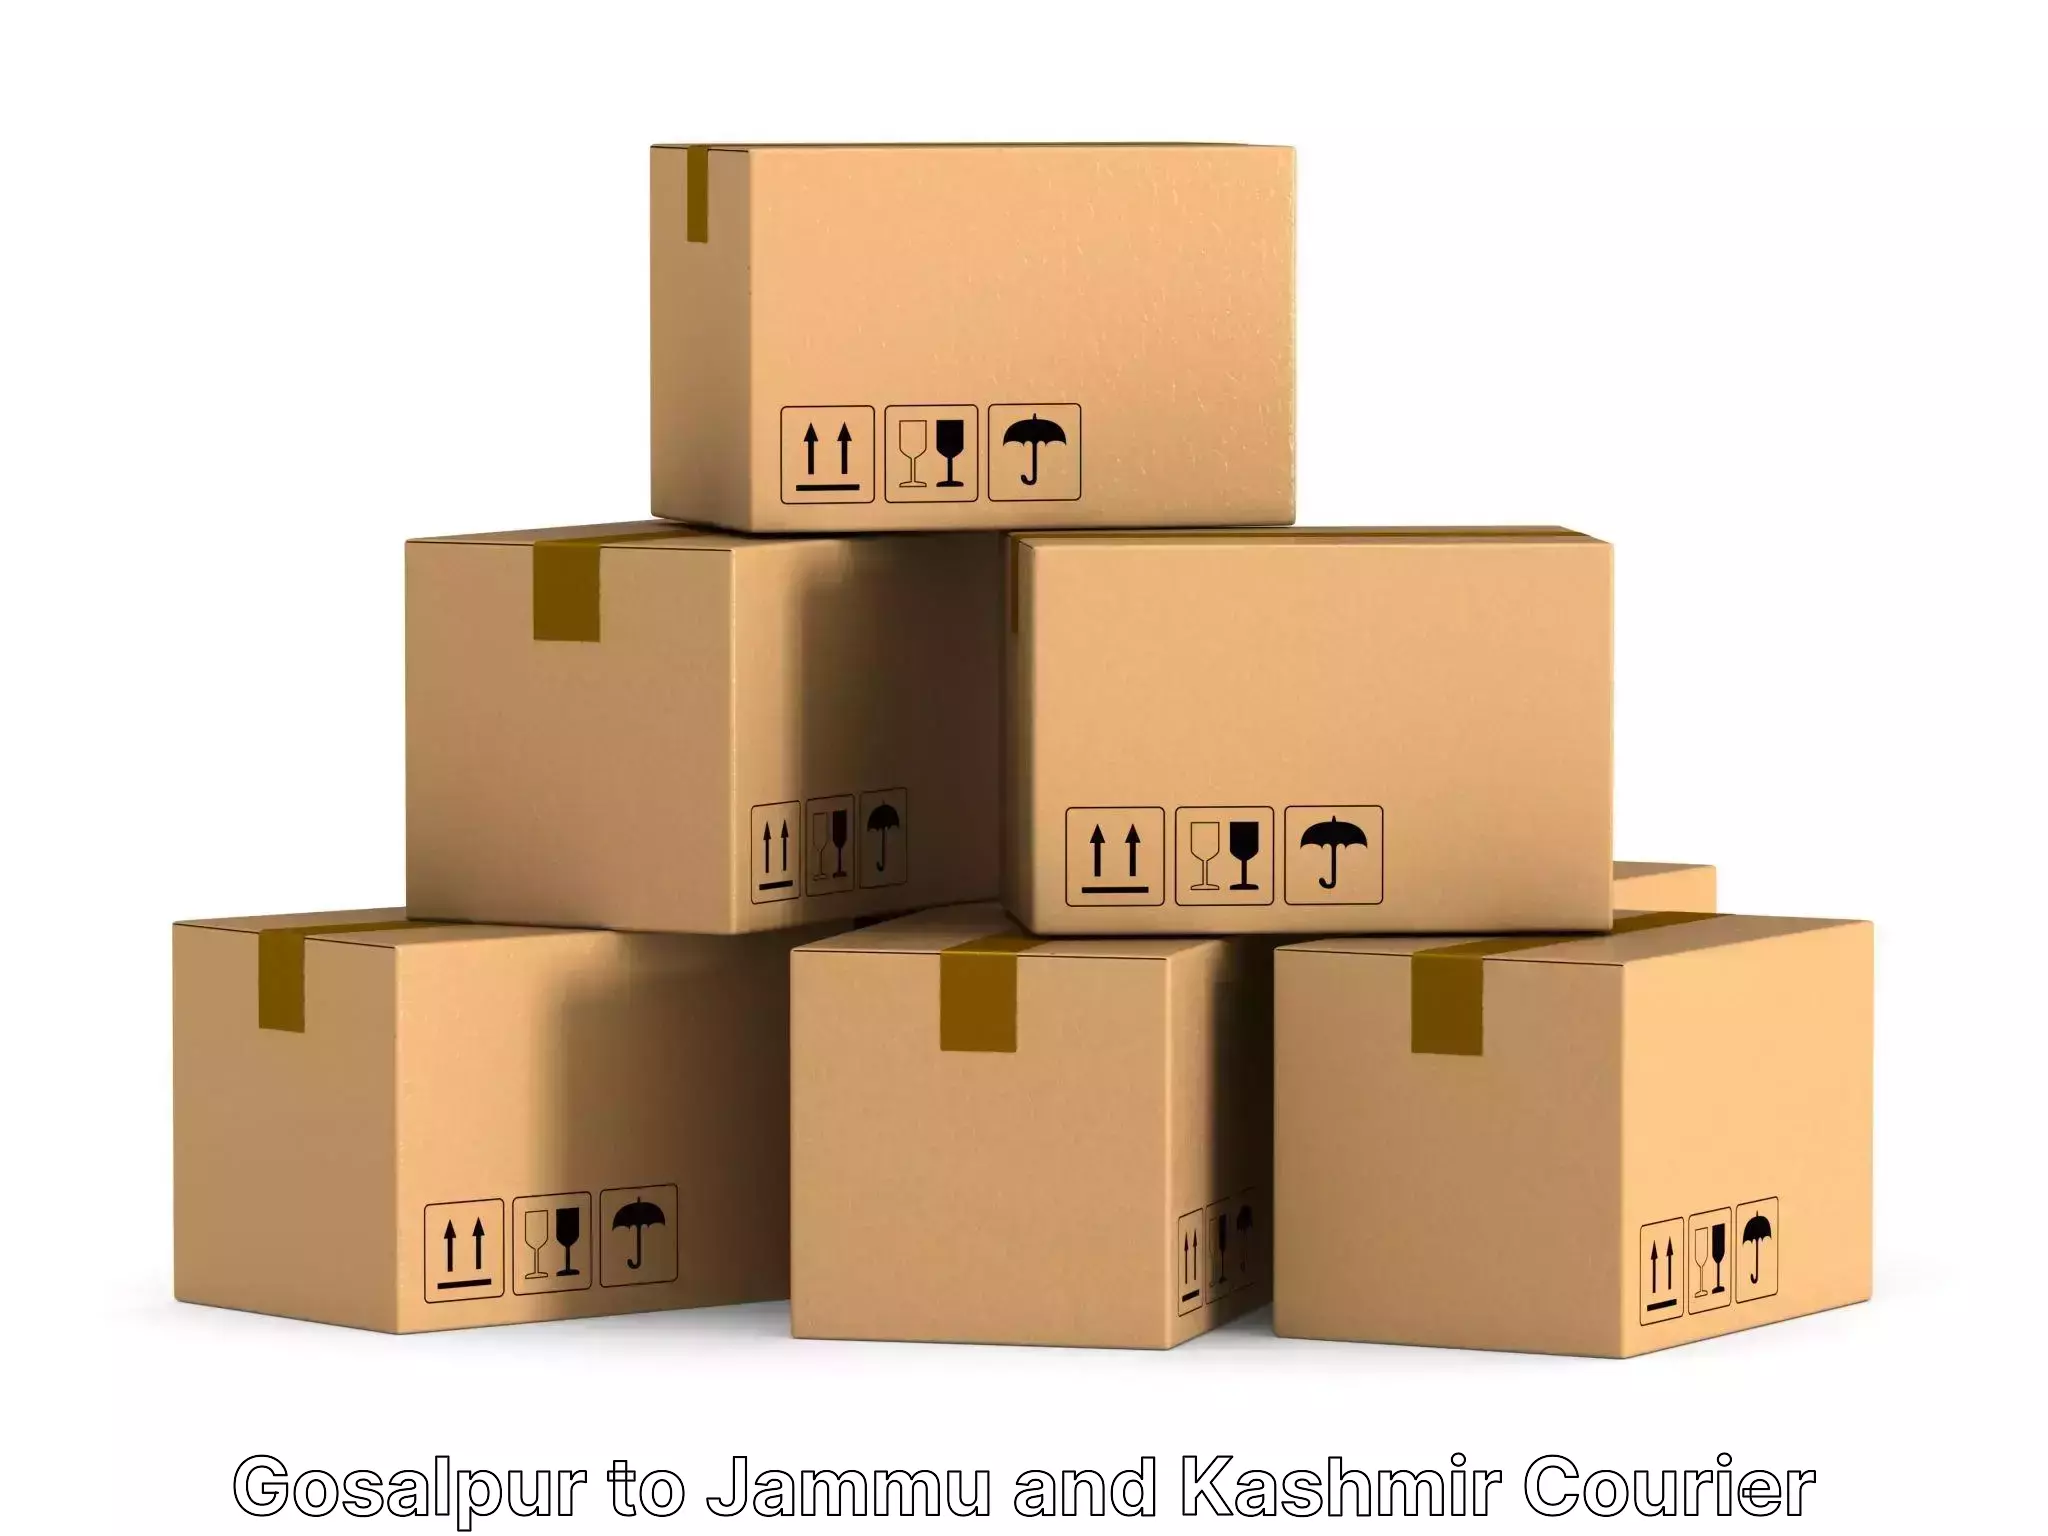 Cost-effective moving options Gosalpur to Leh